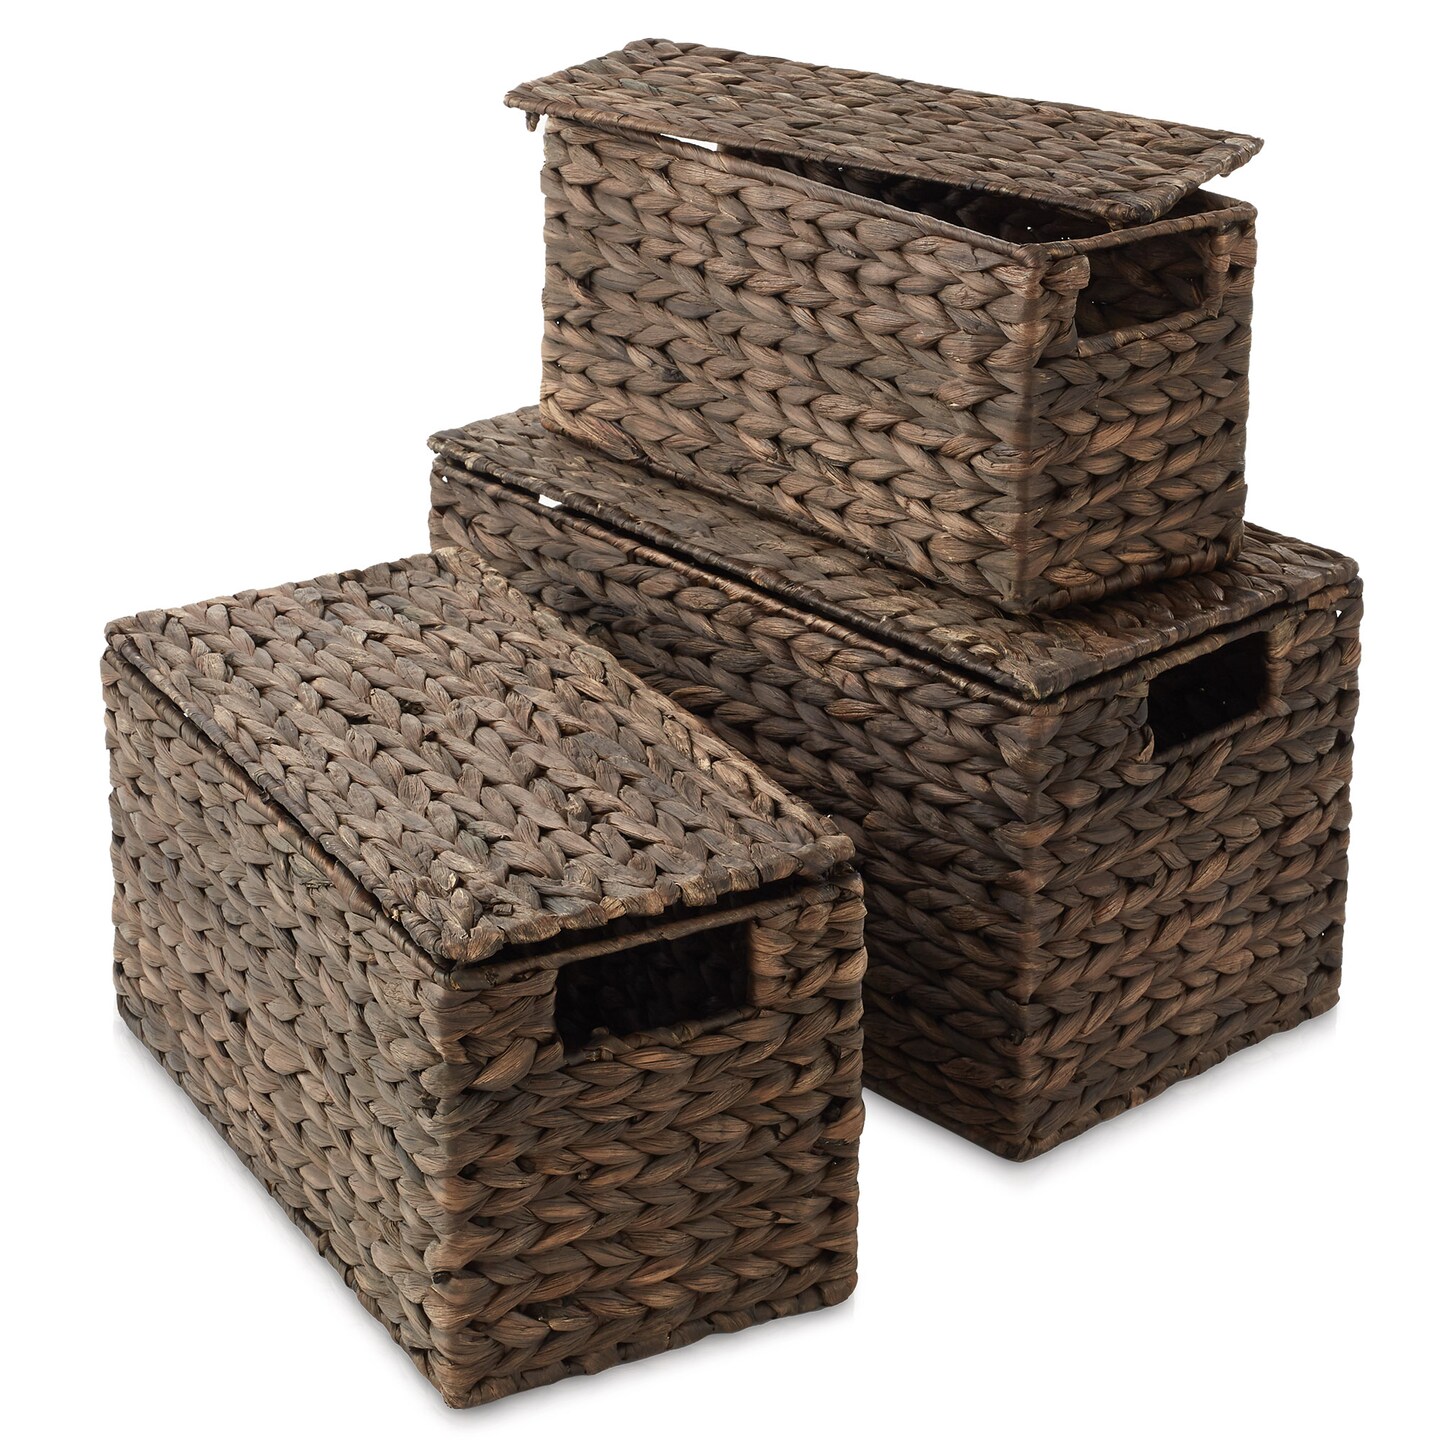 Casafield (Set of 3) Water Hyacinth Storage Baskets with Lids - Small, Medium, Large Woven Nesting Bins for Bathroom, Bedroom, Closets, Shelves